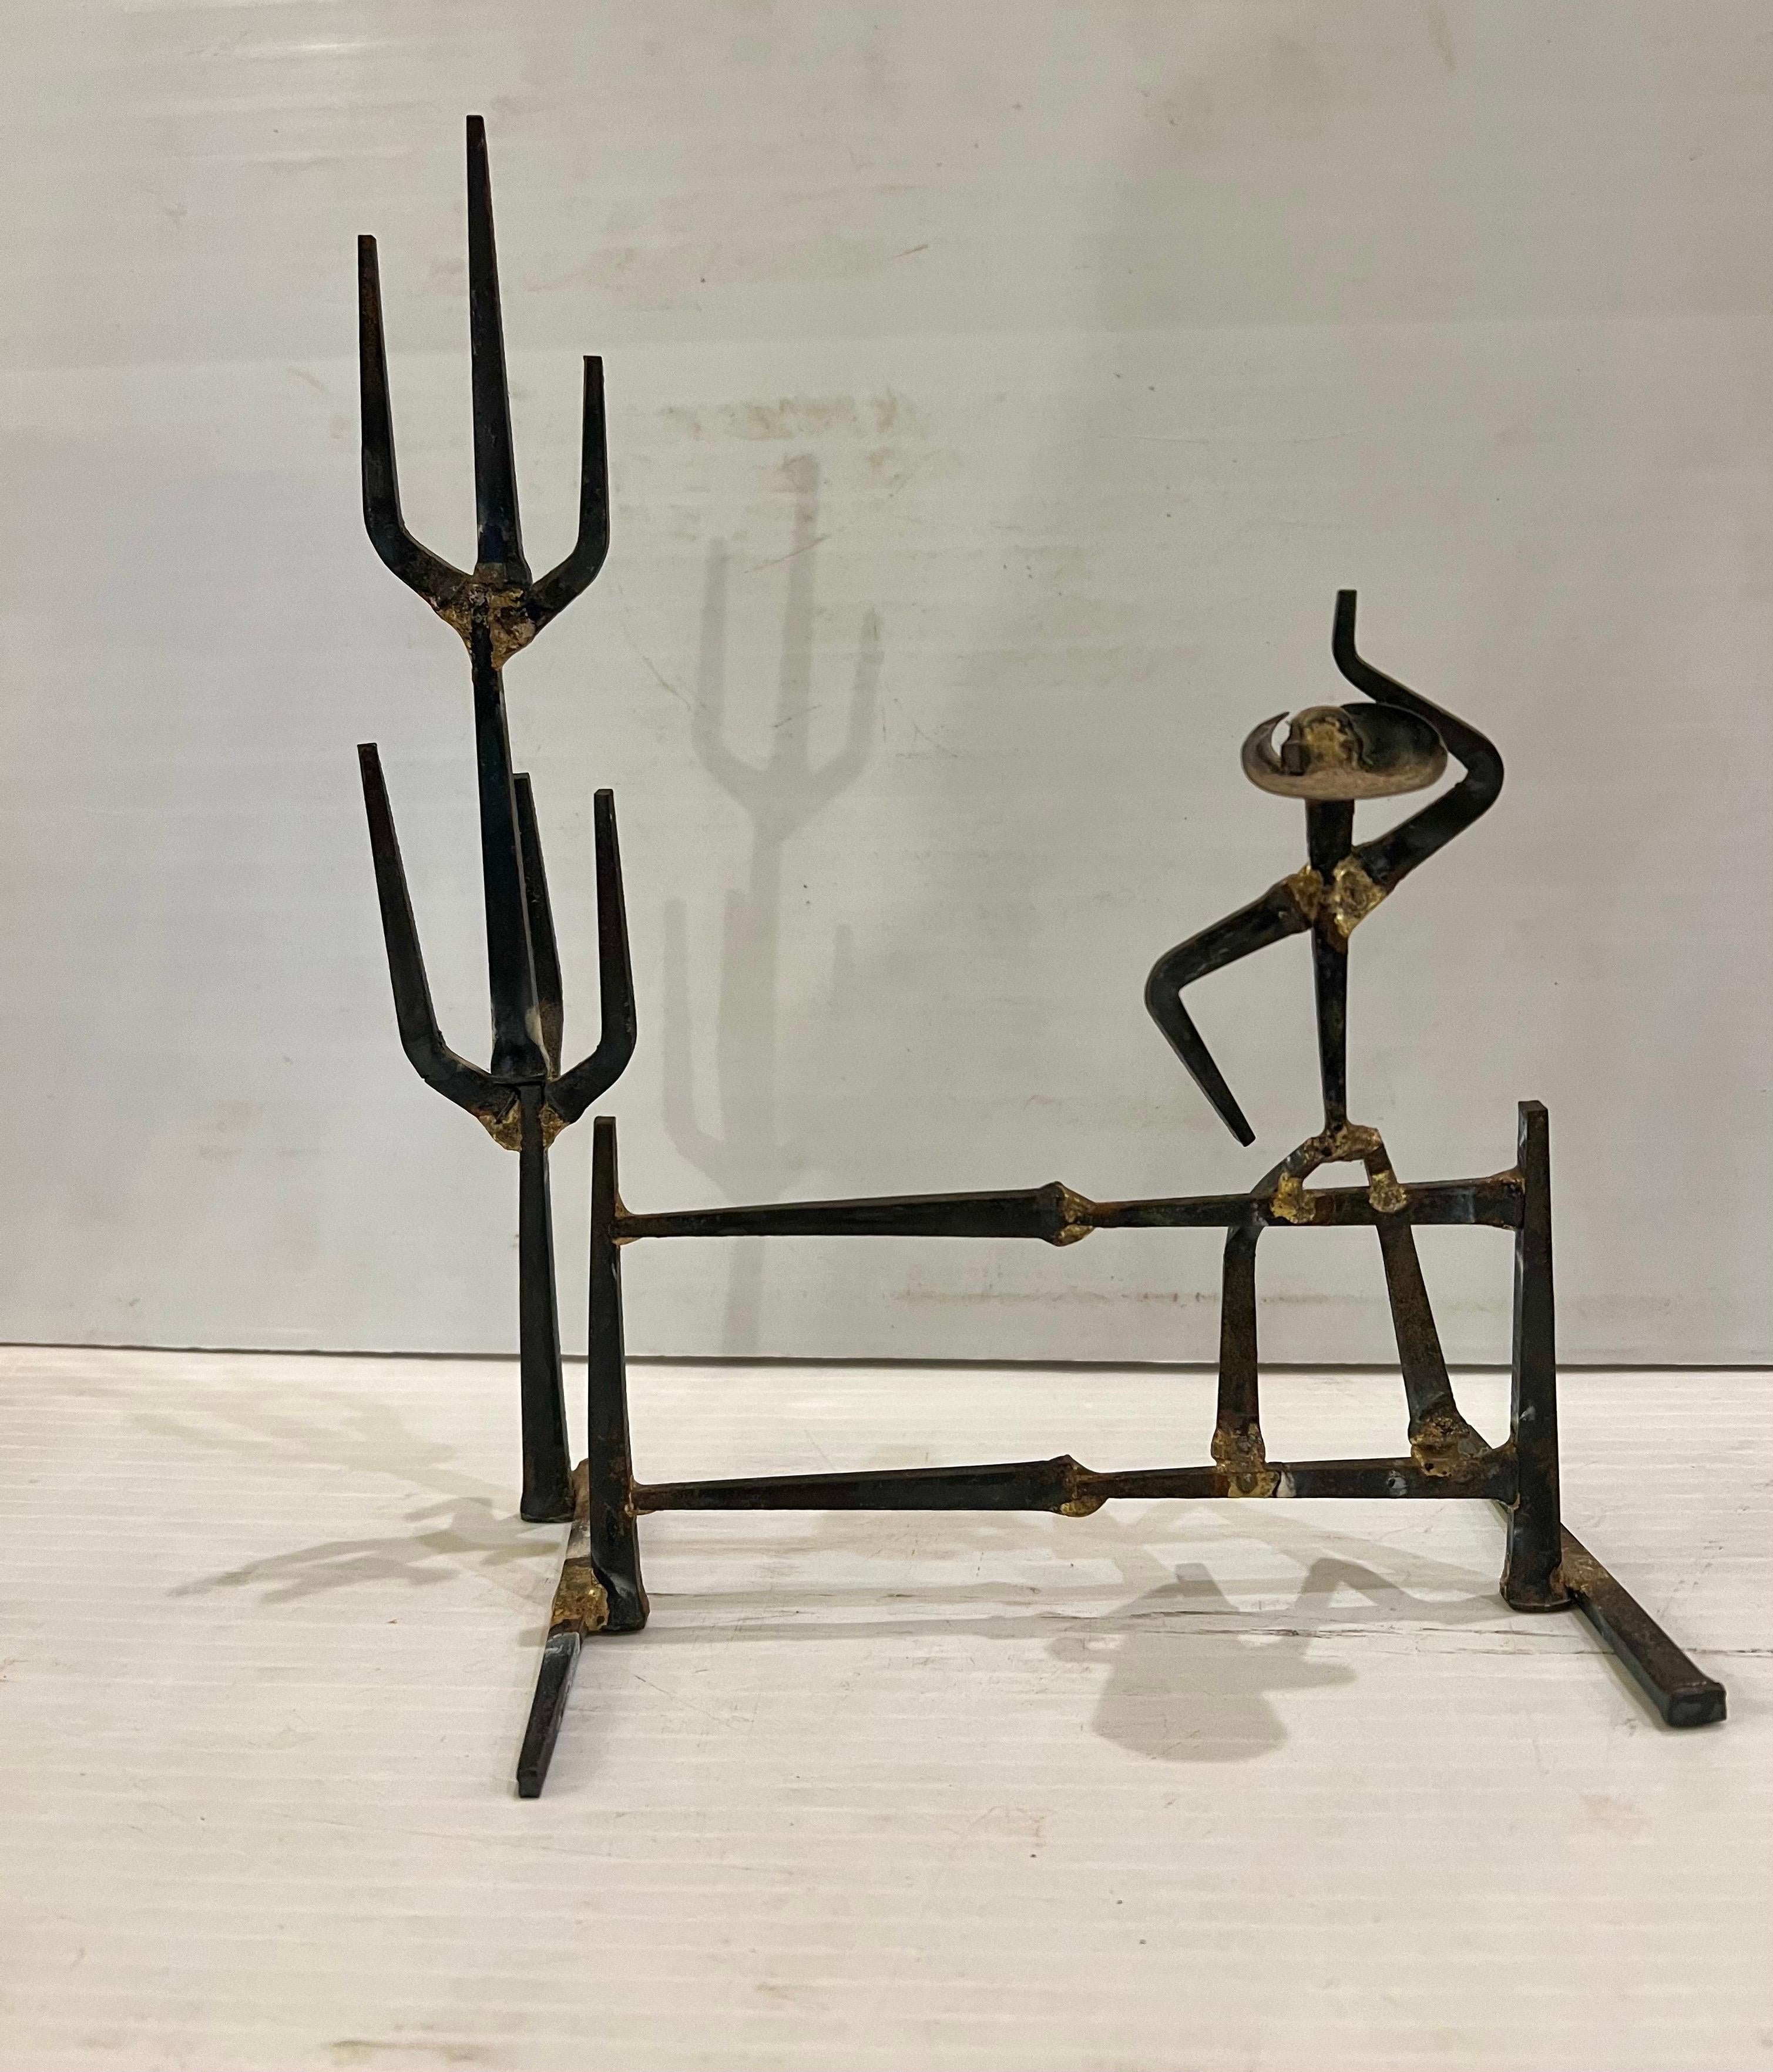 American Whimsical Nail Brass Sculpture Cowboy & Cactus on a Fence circa 1970's For Sale